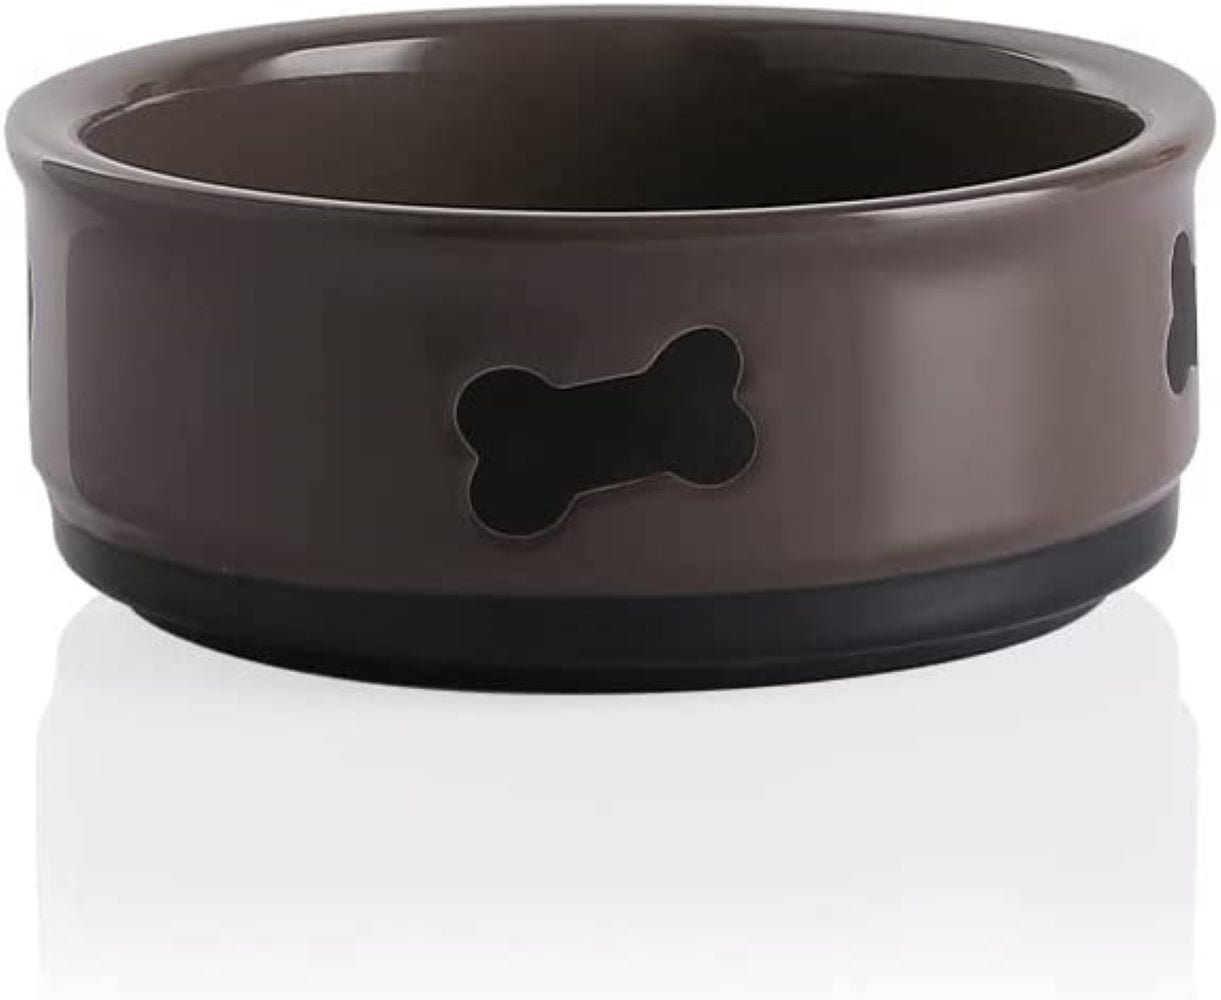 Sweejar Ceramic Dog Bowls with Bone Pattern, Dog Food Dish for Small Dogs, Porcelain Pet Bowl,16 oz (Gray), Size: One Size